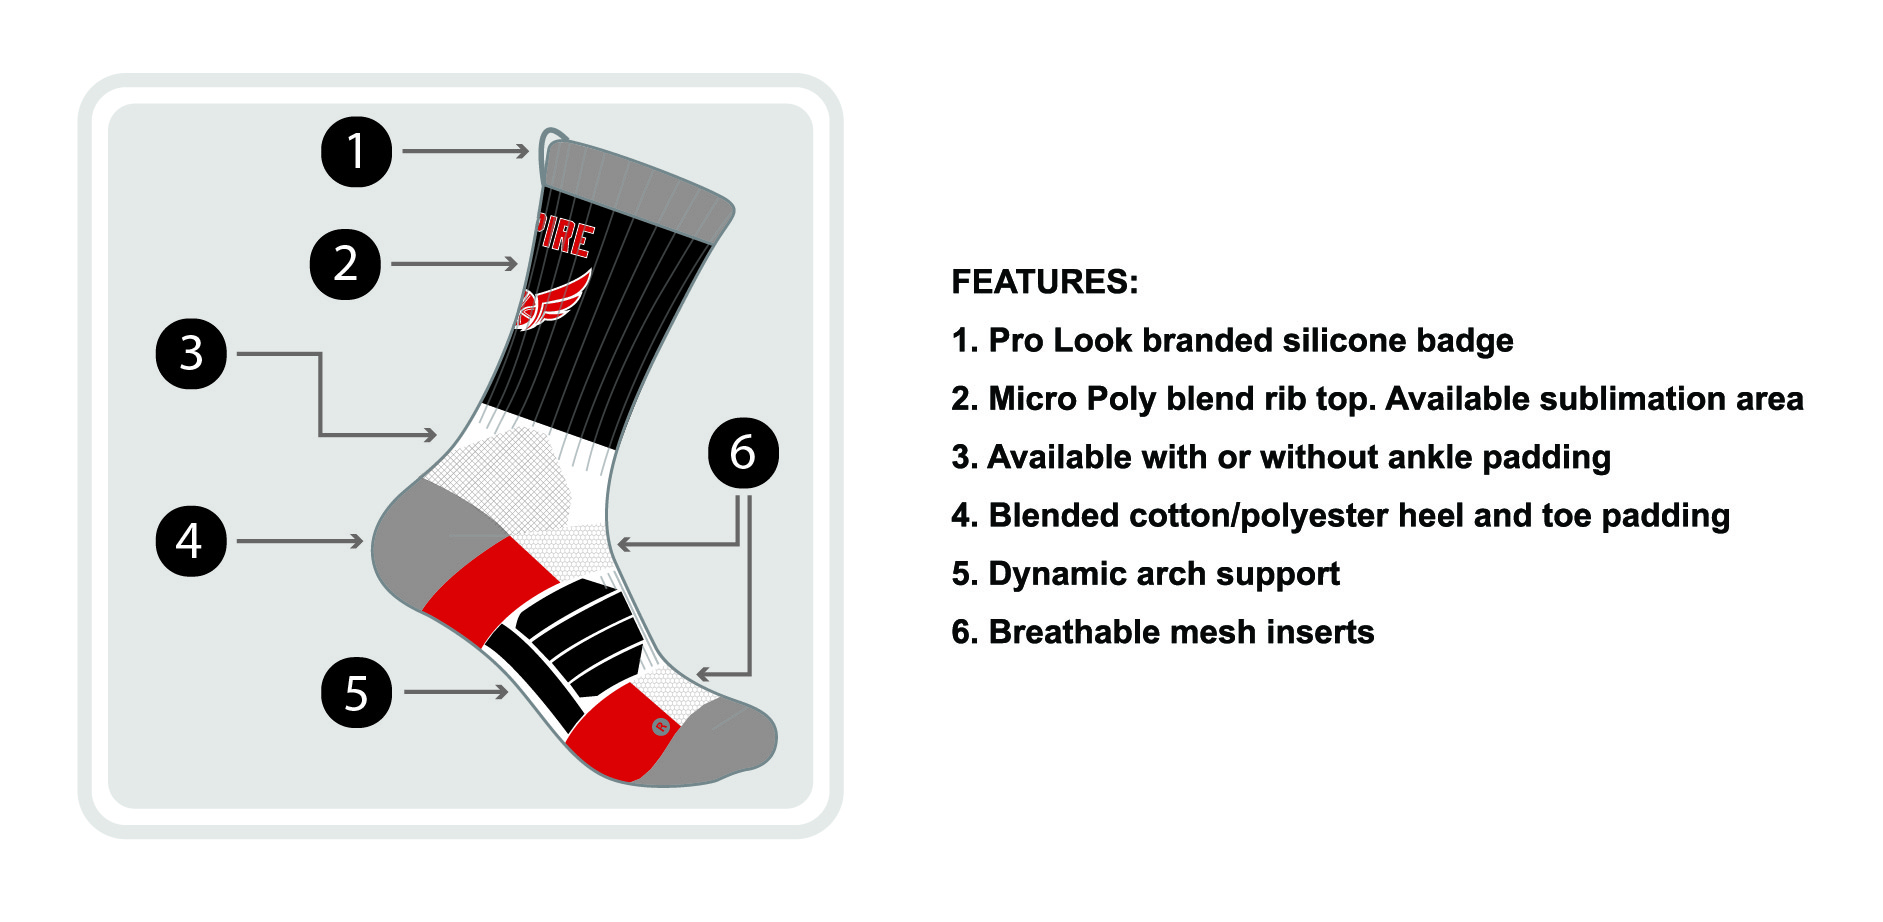 Introducing: The PROLOOK Sock | PROLOOK SPORTS